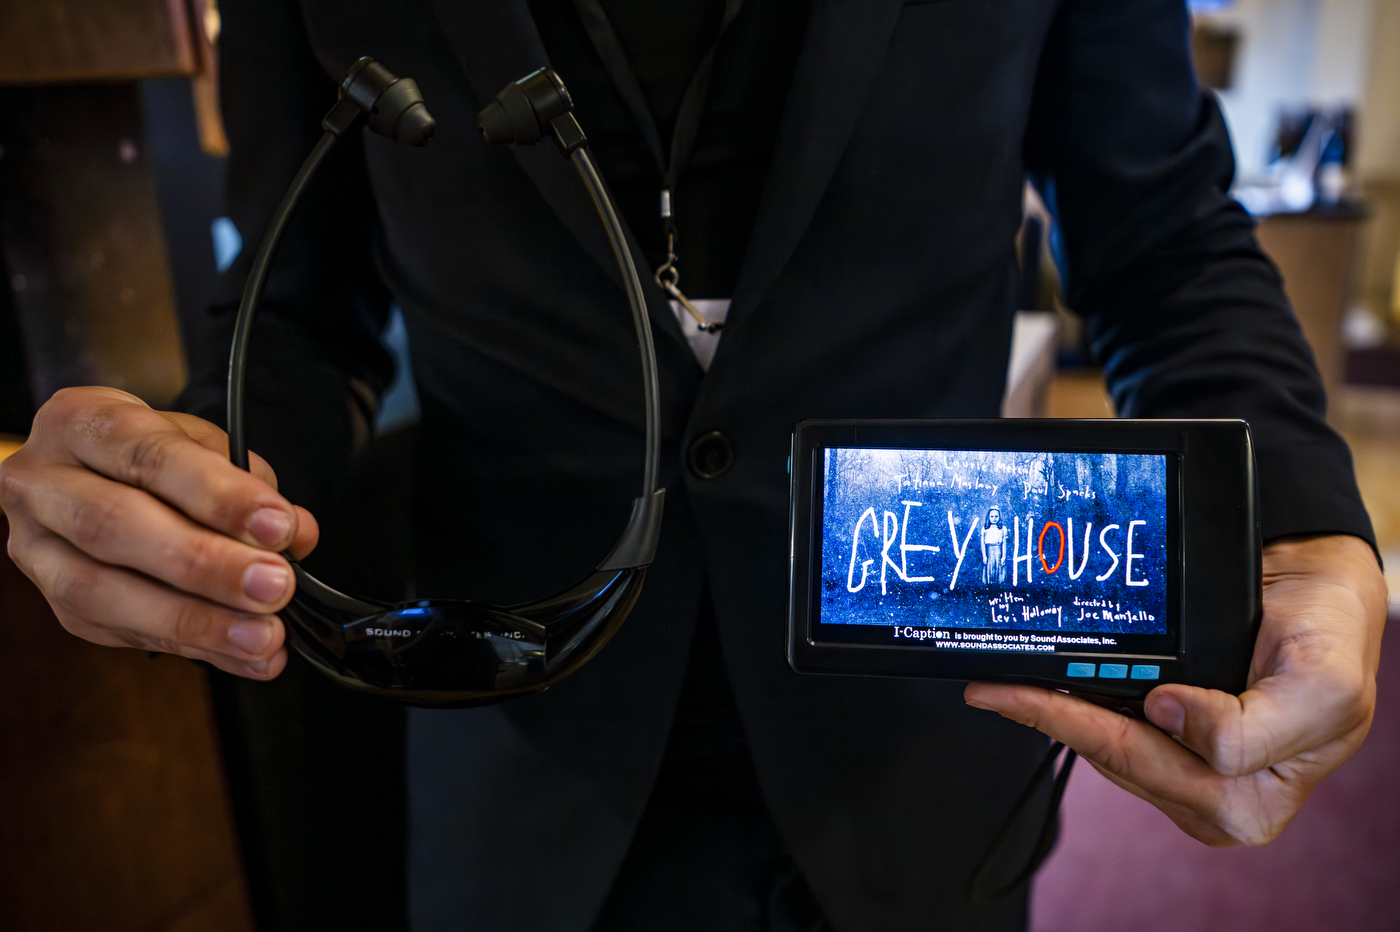 hand held closed-captioning device displaying Grey House